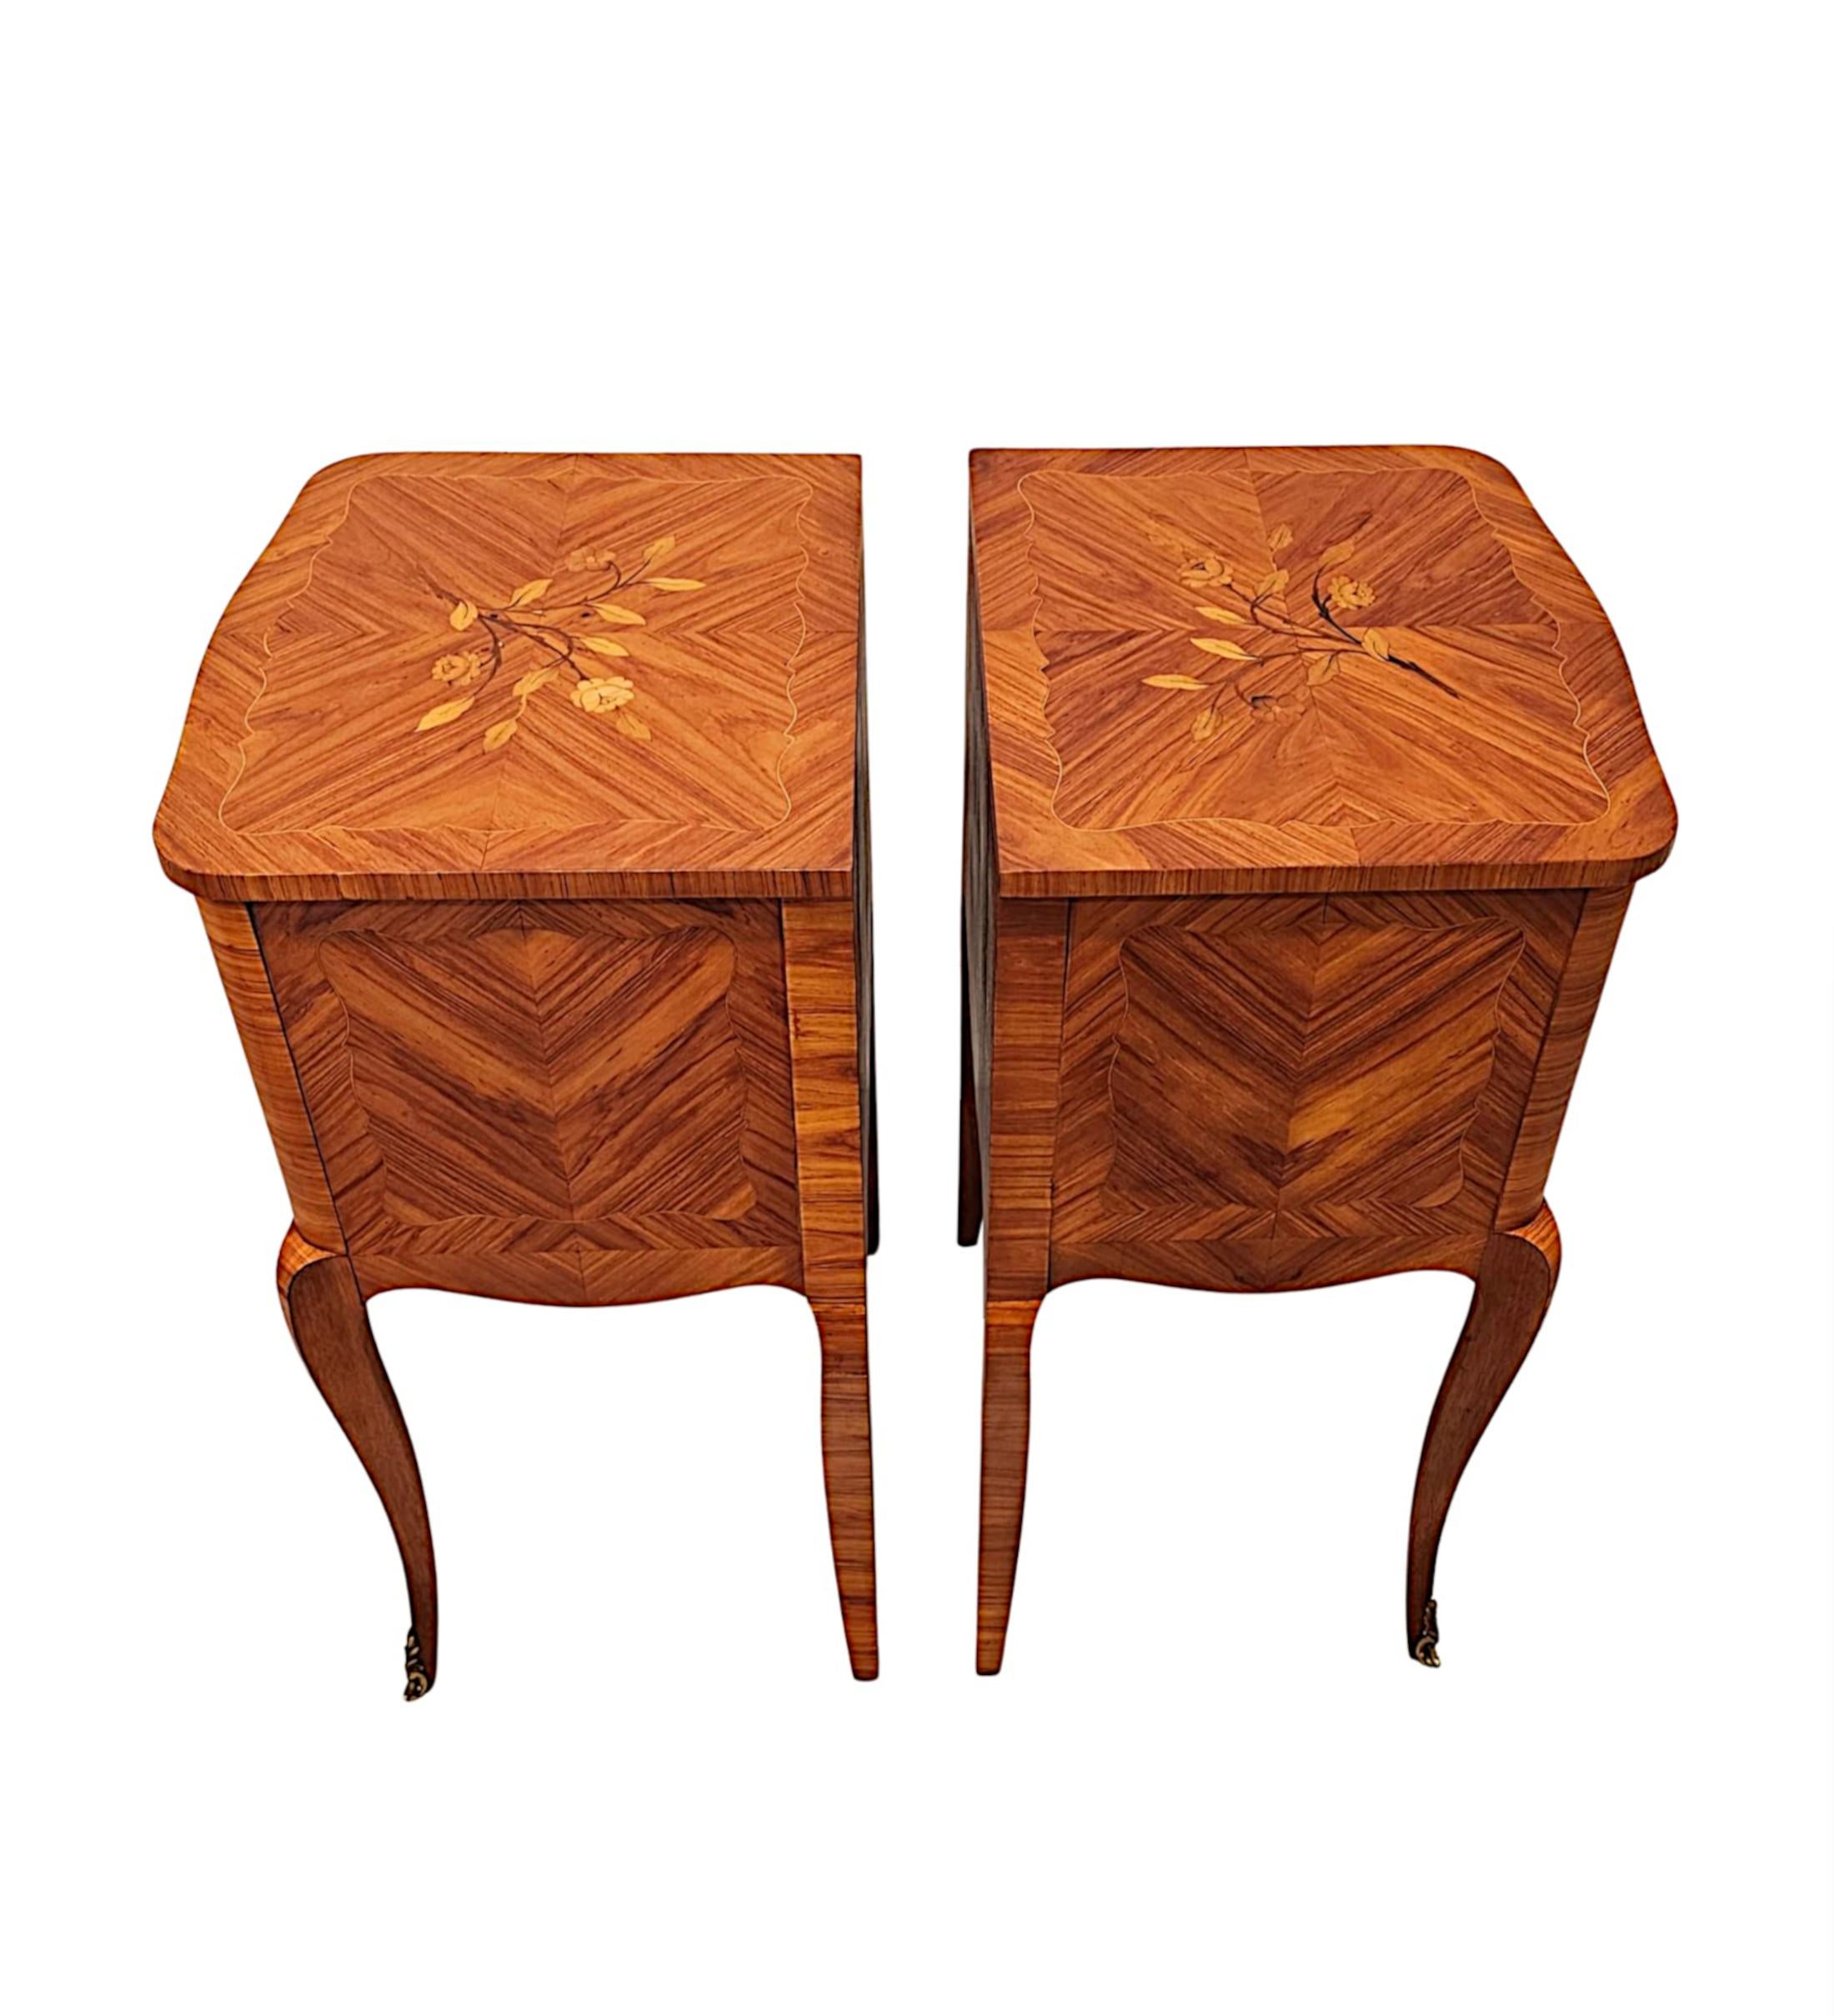 Fruitwood A Fabulous Pair of Early 20th Century Marquetry Inlaid Bedside Tables or Chests For Sale